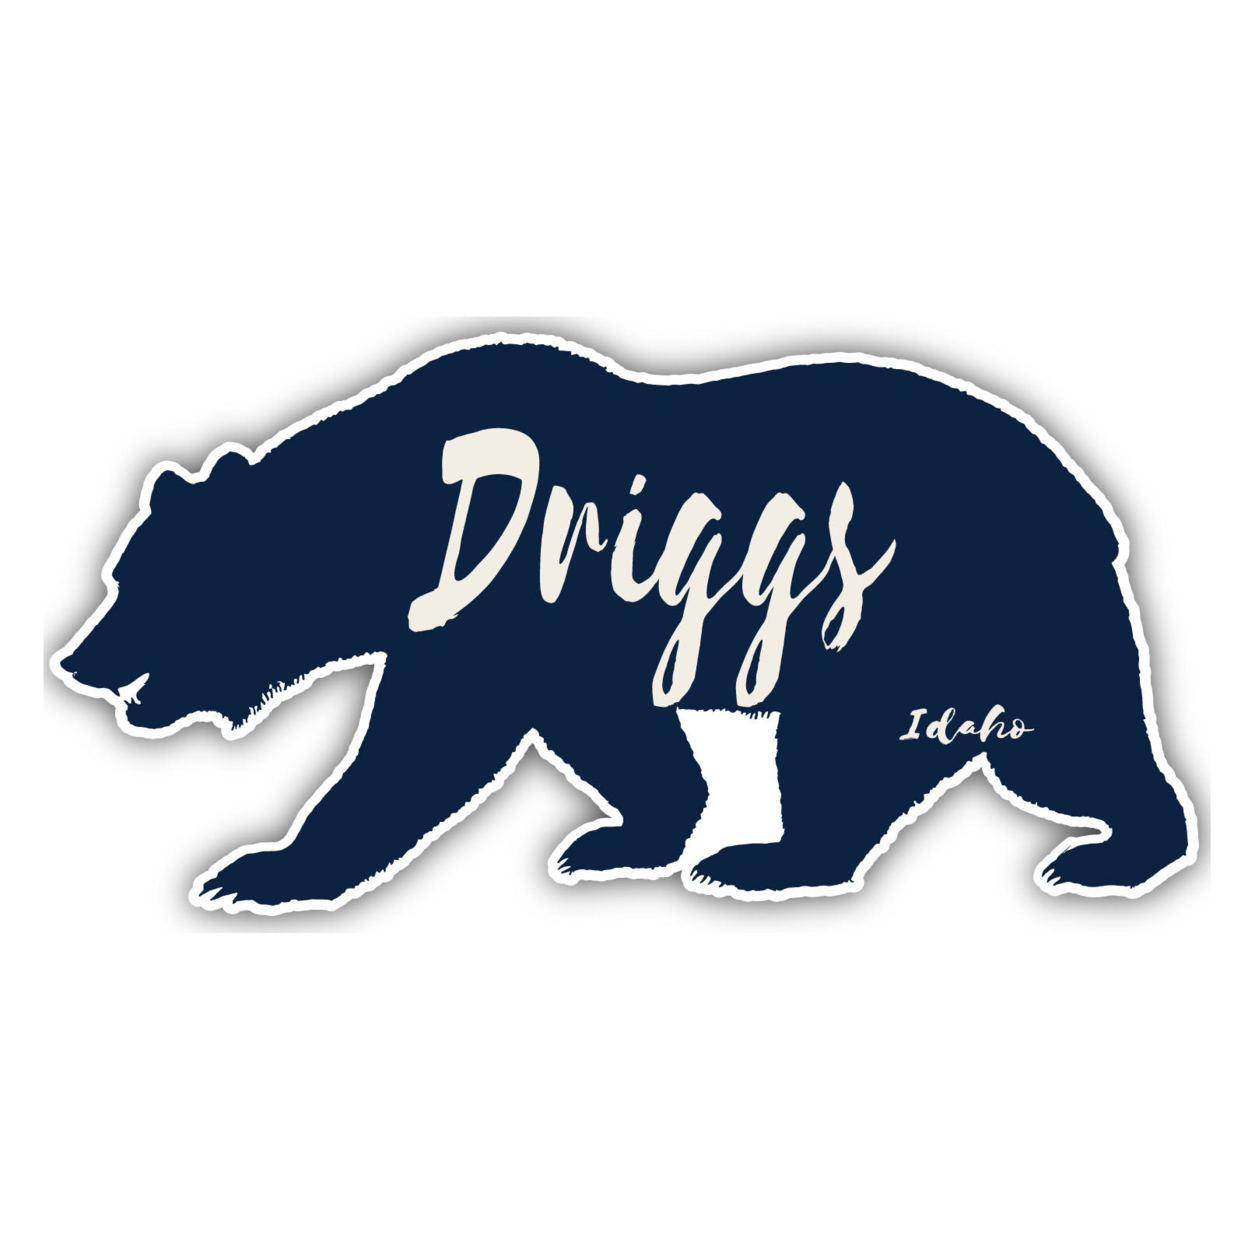 Driggs Idaho Souvenir Decorative Stickers (Choose Theme And Size) - 4-Pack, 2-Inch, Tent